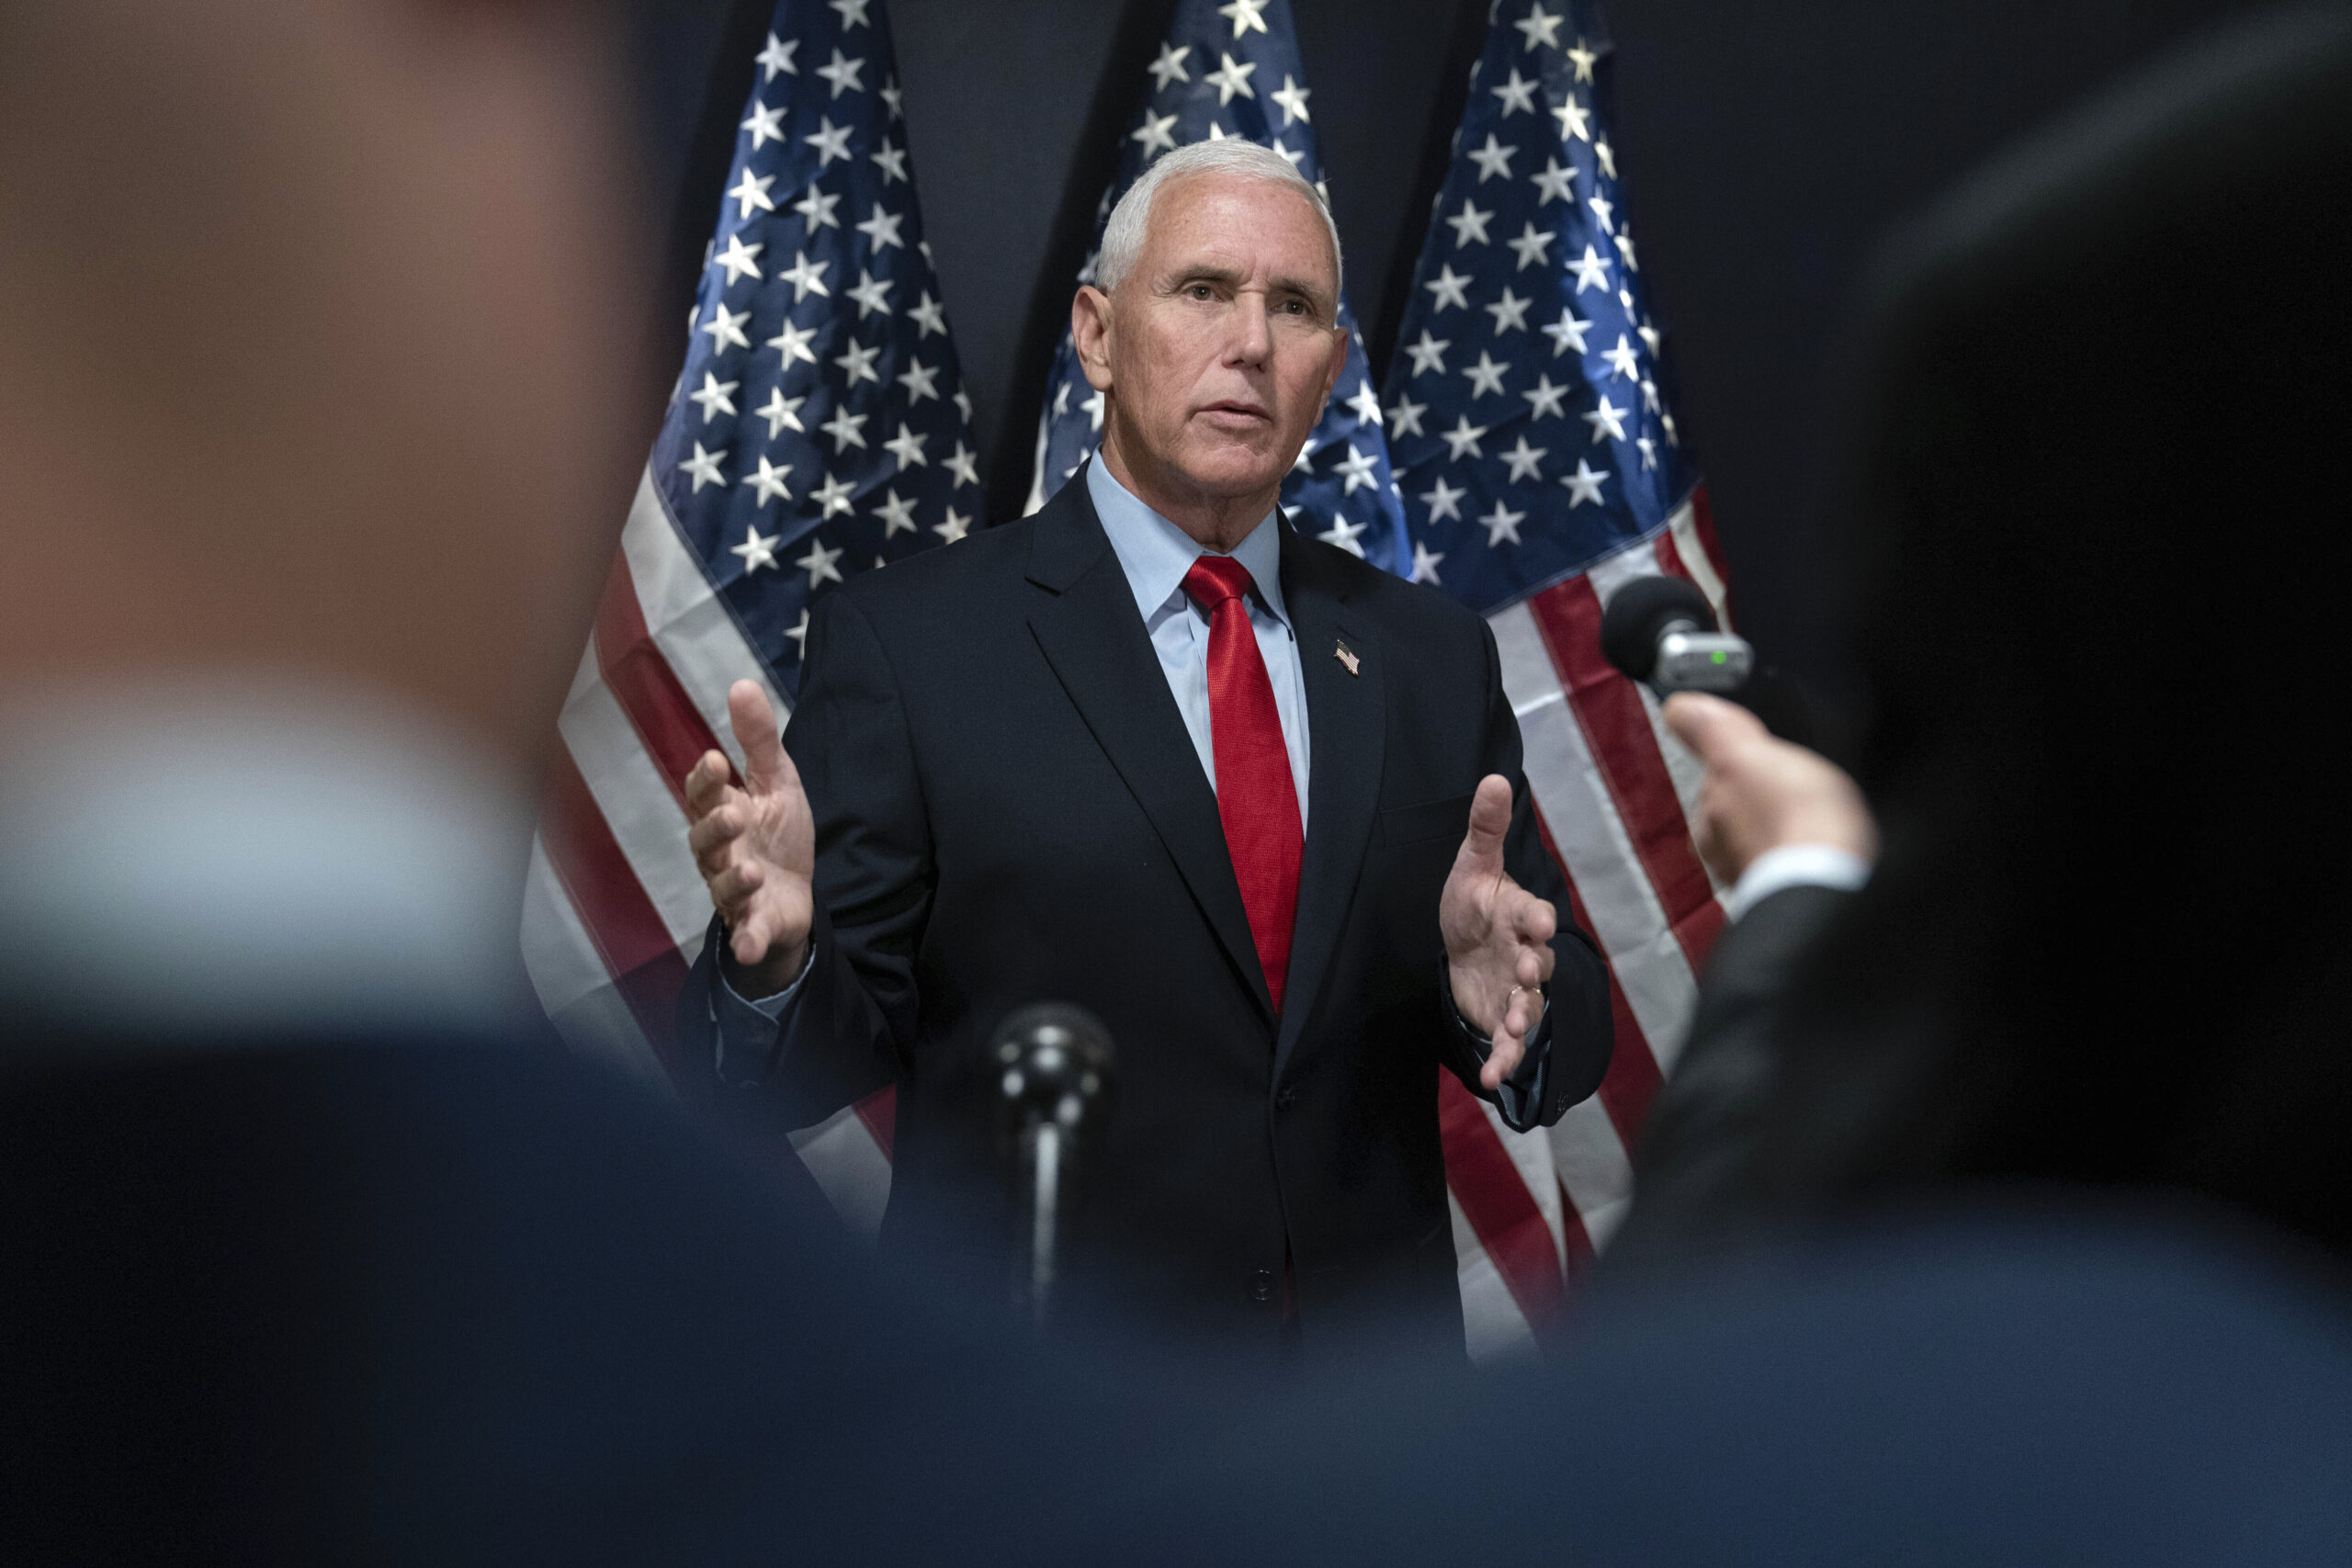 Pence criticizes Trump's stance on abortion during conservative conference.